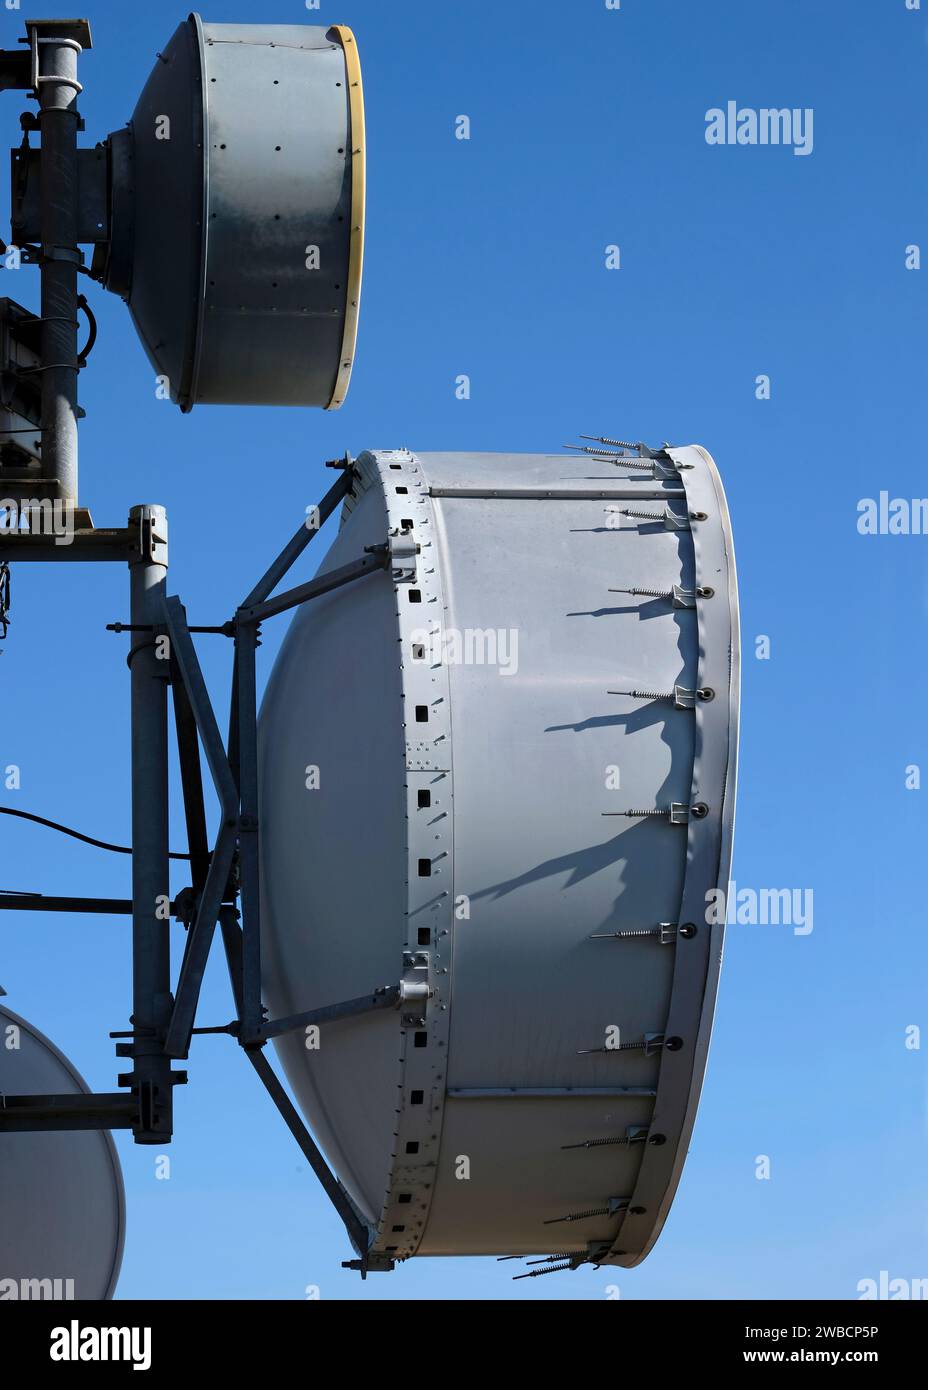 Telecommunication antenna with multiple satellite dishes against the blue sky Stock Photo